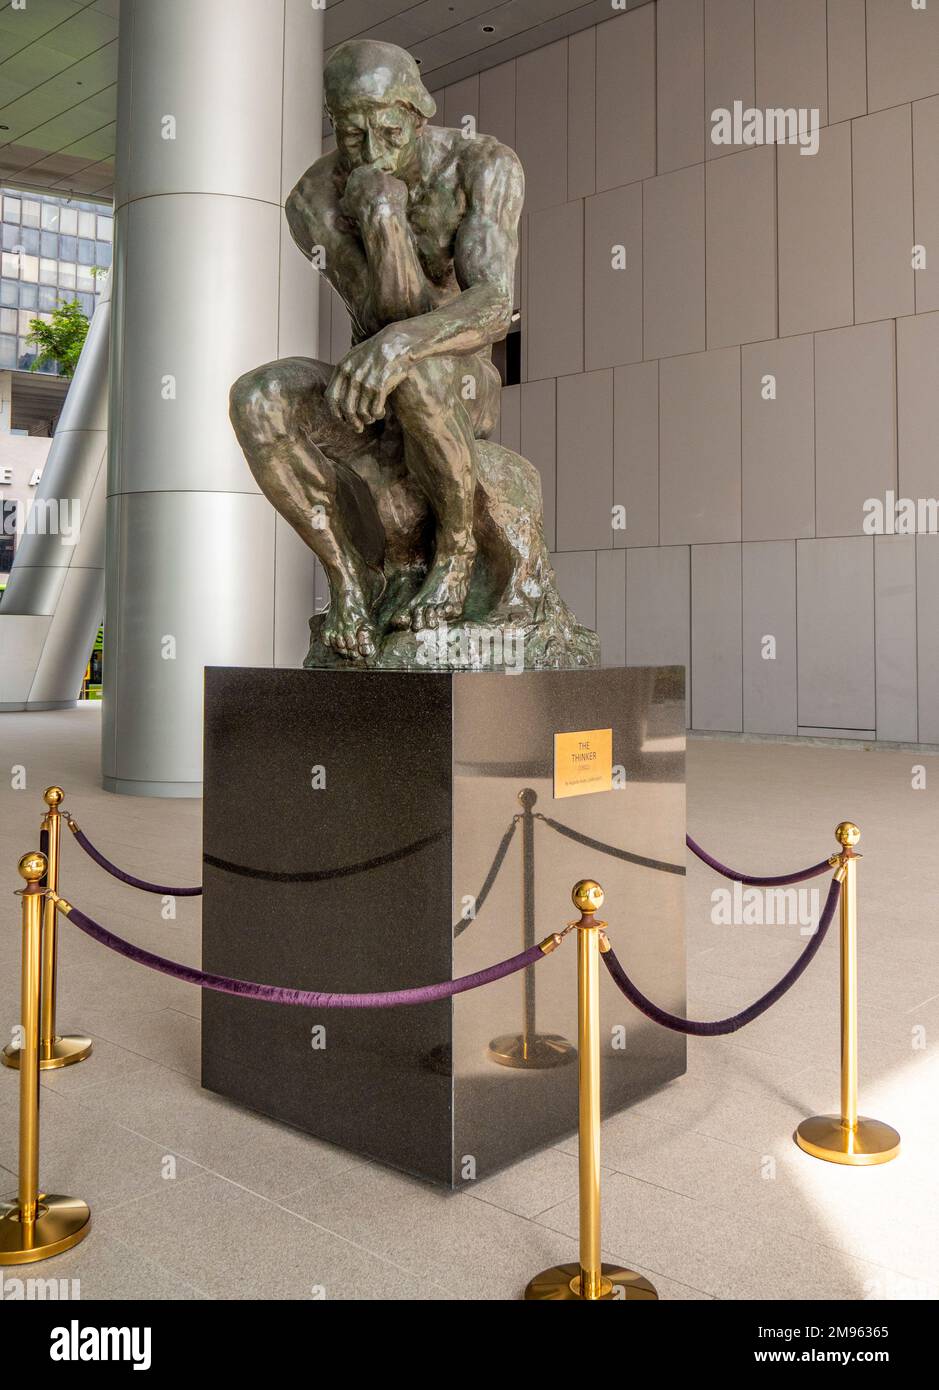 Bronze statue The Thinker by Auguste Rodin on public display in undercroft of OUE Bayfront Building in CBD or Singapore Stock Photo